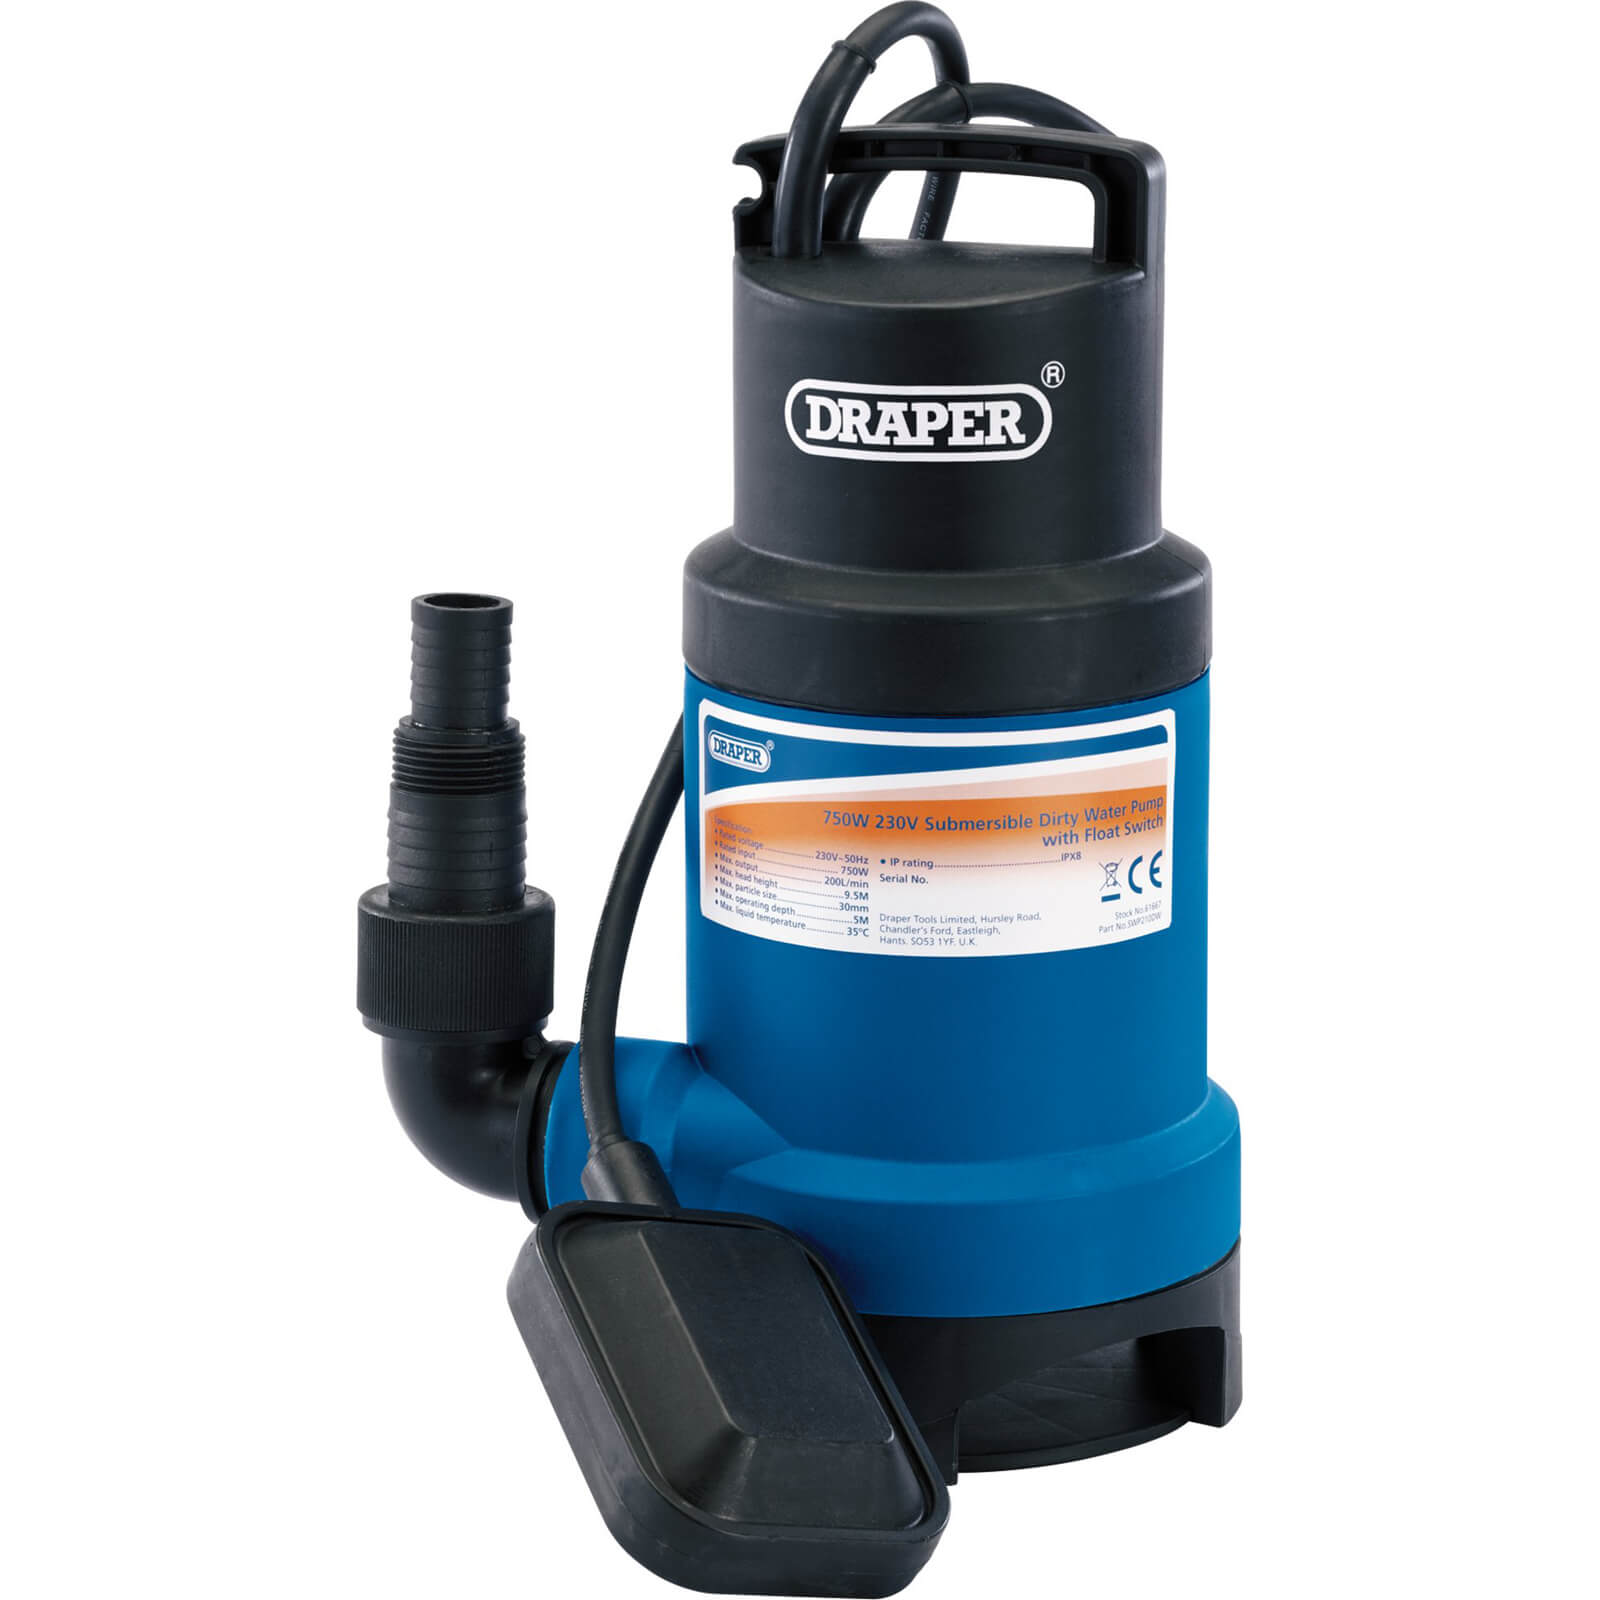 Image of Draper SWP210DW Submersible Dirty Water Pump 240v